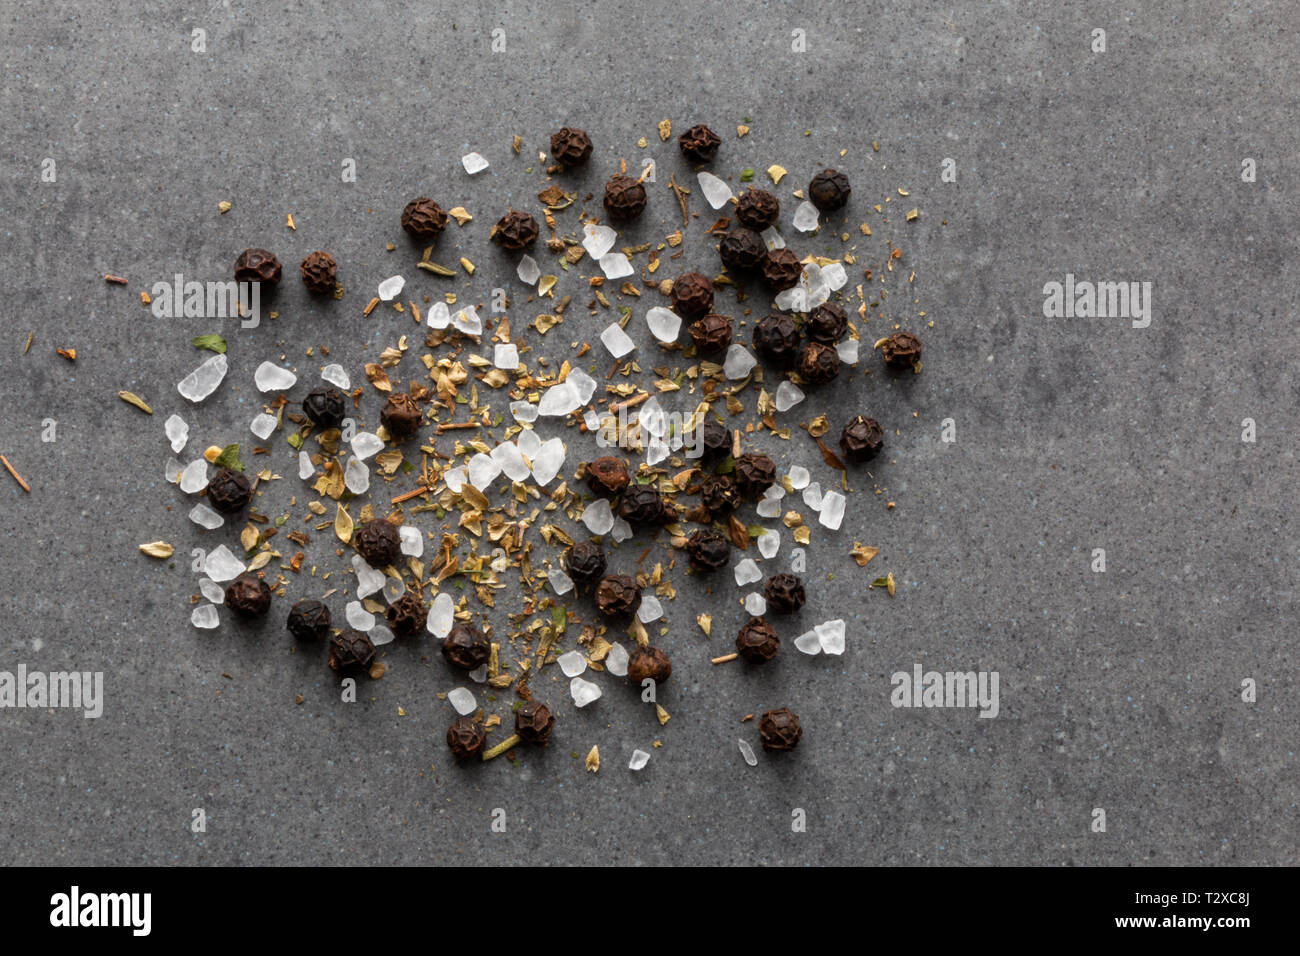 salt black pepper and herbs on gray background with copy space Stock Photo